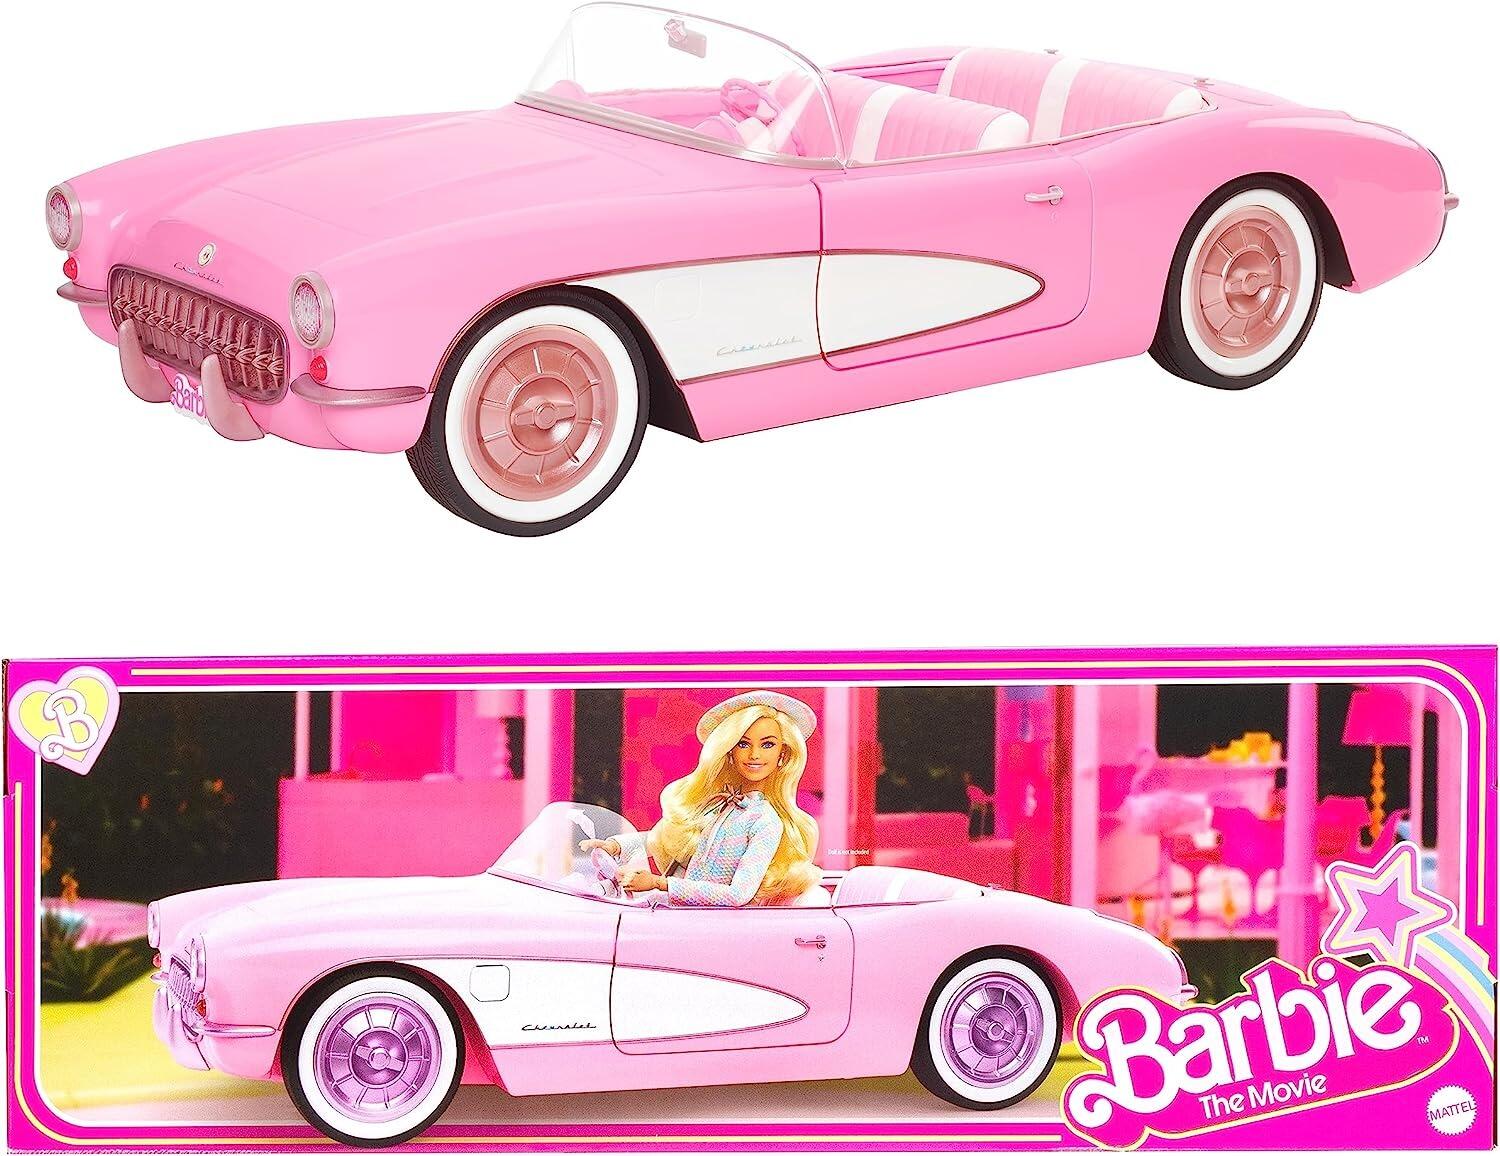 Barbie The Movie Car, Vintage-Inspired Pink Corvette Convertible with White Wall Tires and Trunk Storage